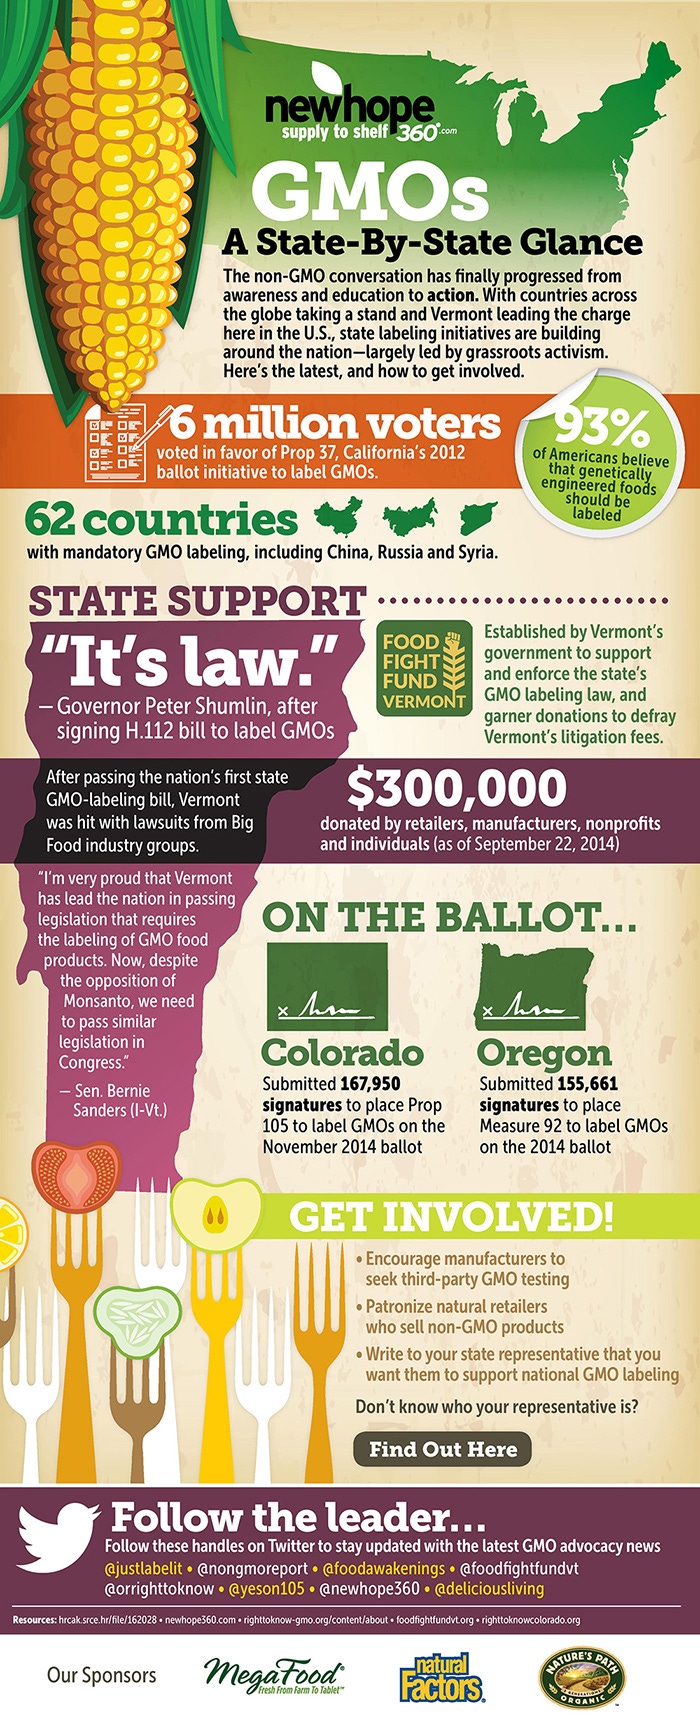 [Infographic] GMOs: a state-by-state glance